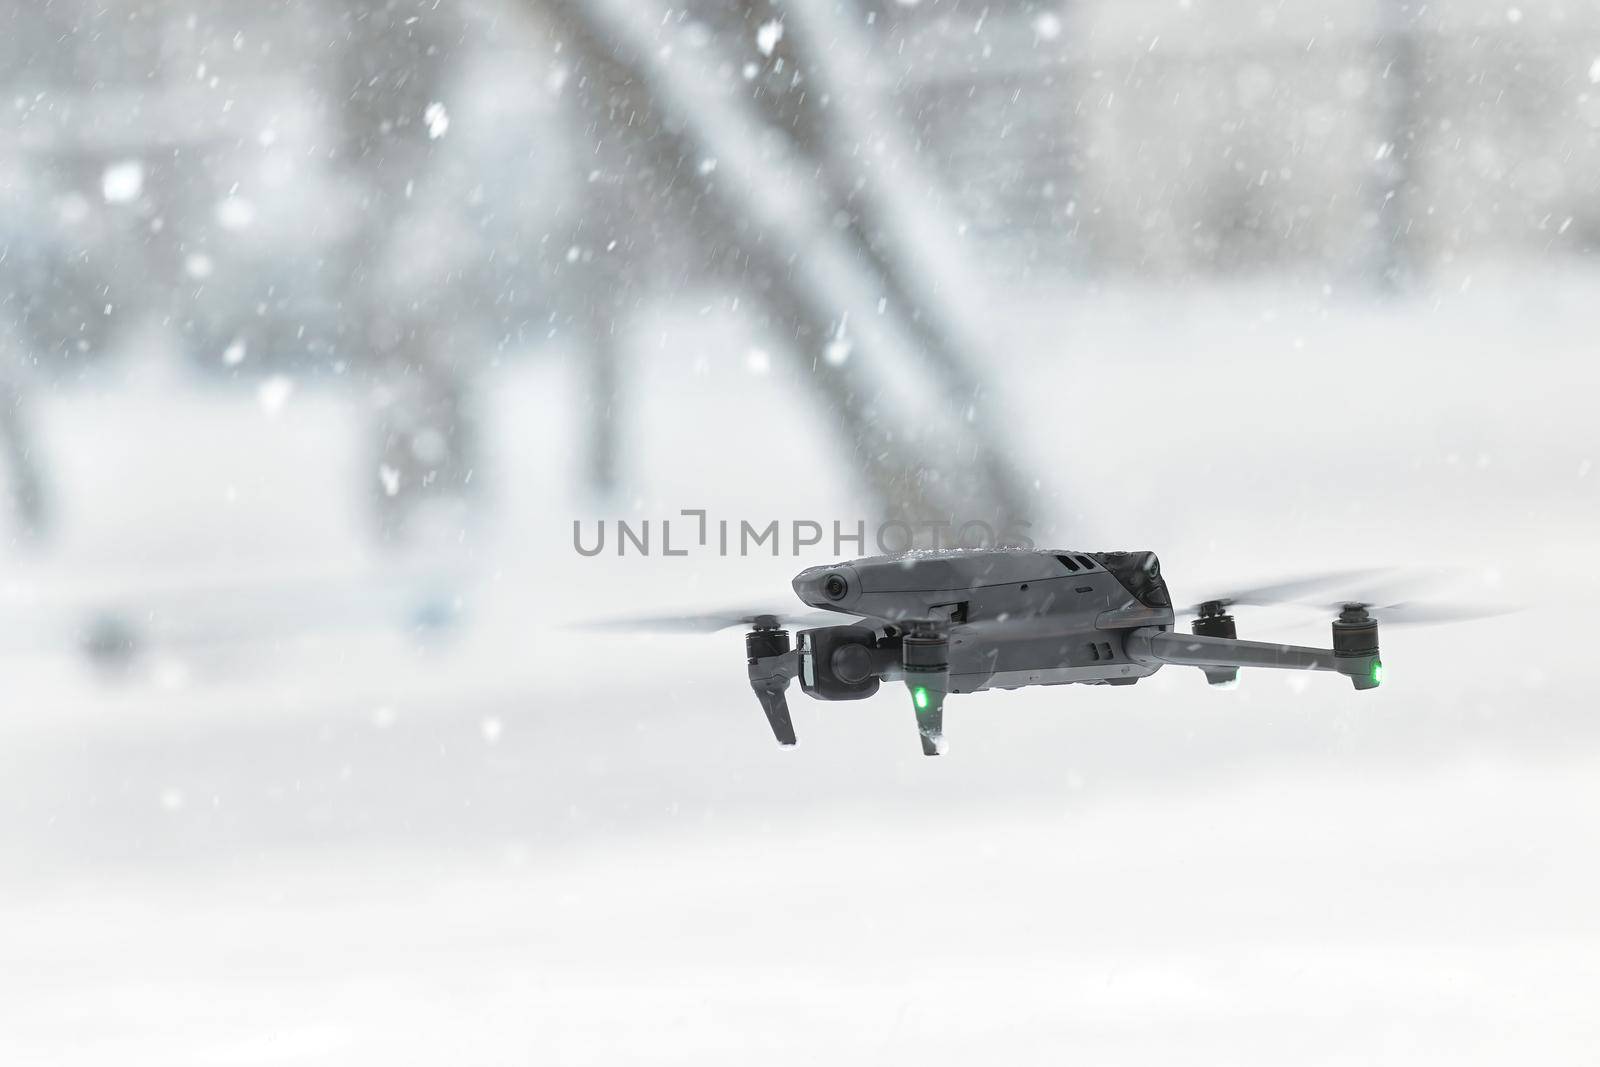 New DJI Mavic 3, flying in snow conditions. DJI Mavic 3 one of the most portable drones in the market, with Hasselblad camera. 25.01.2022 Rostov-on-Don, Russia.